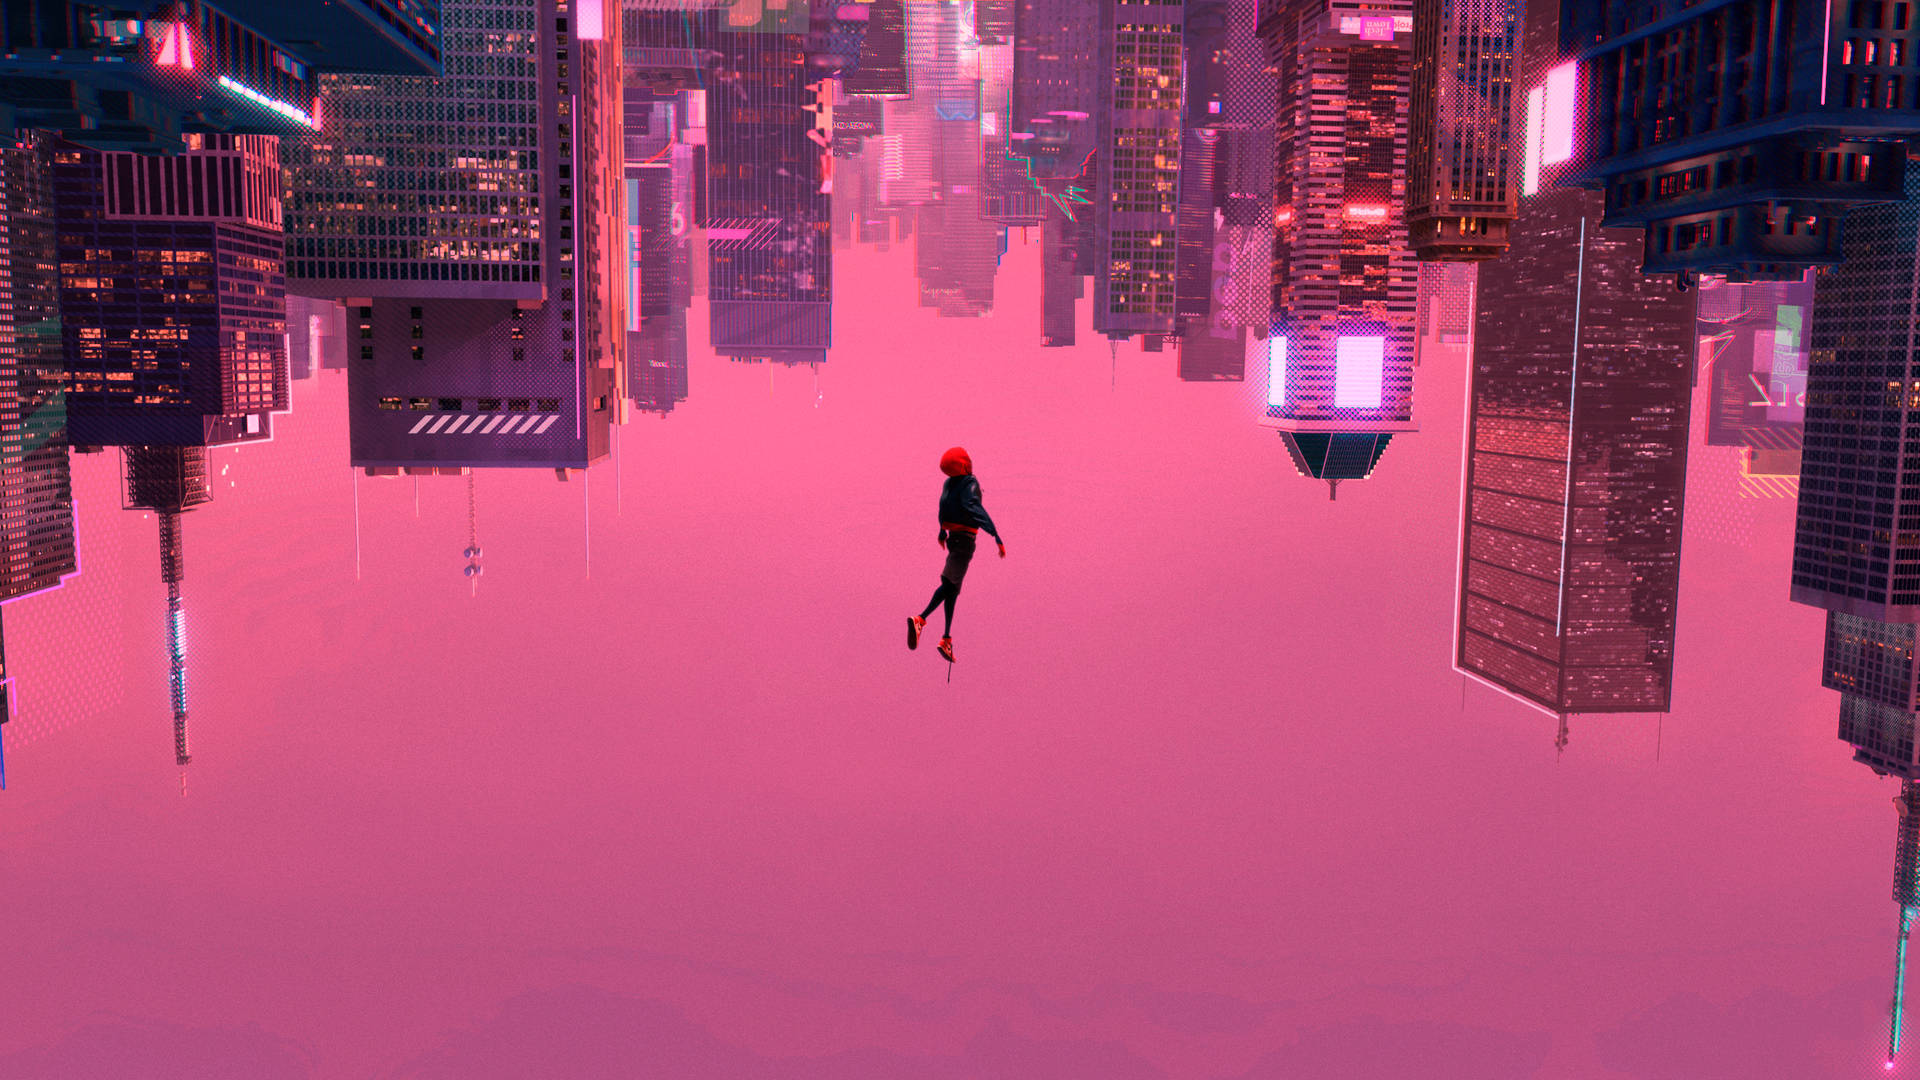 Spiderman falling gracefully against a pink backdrop Wallpaper